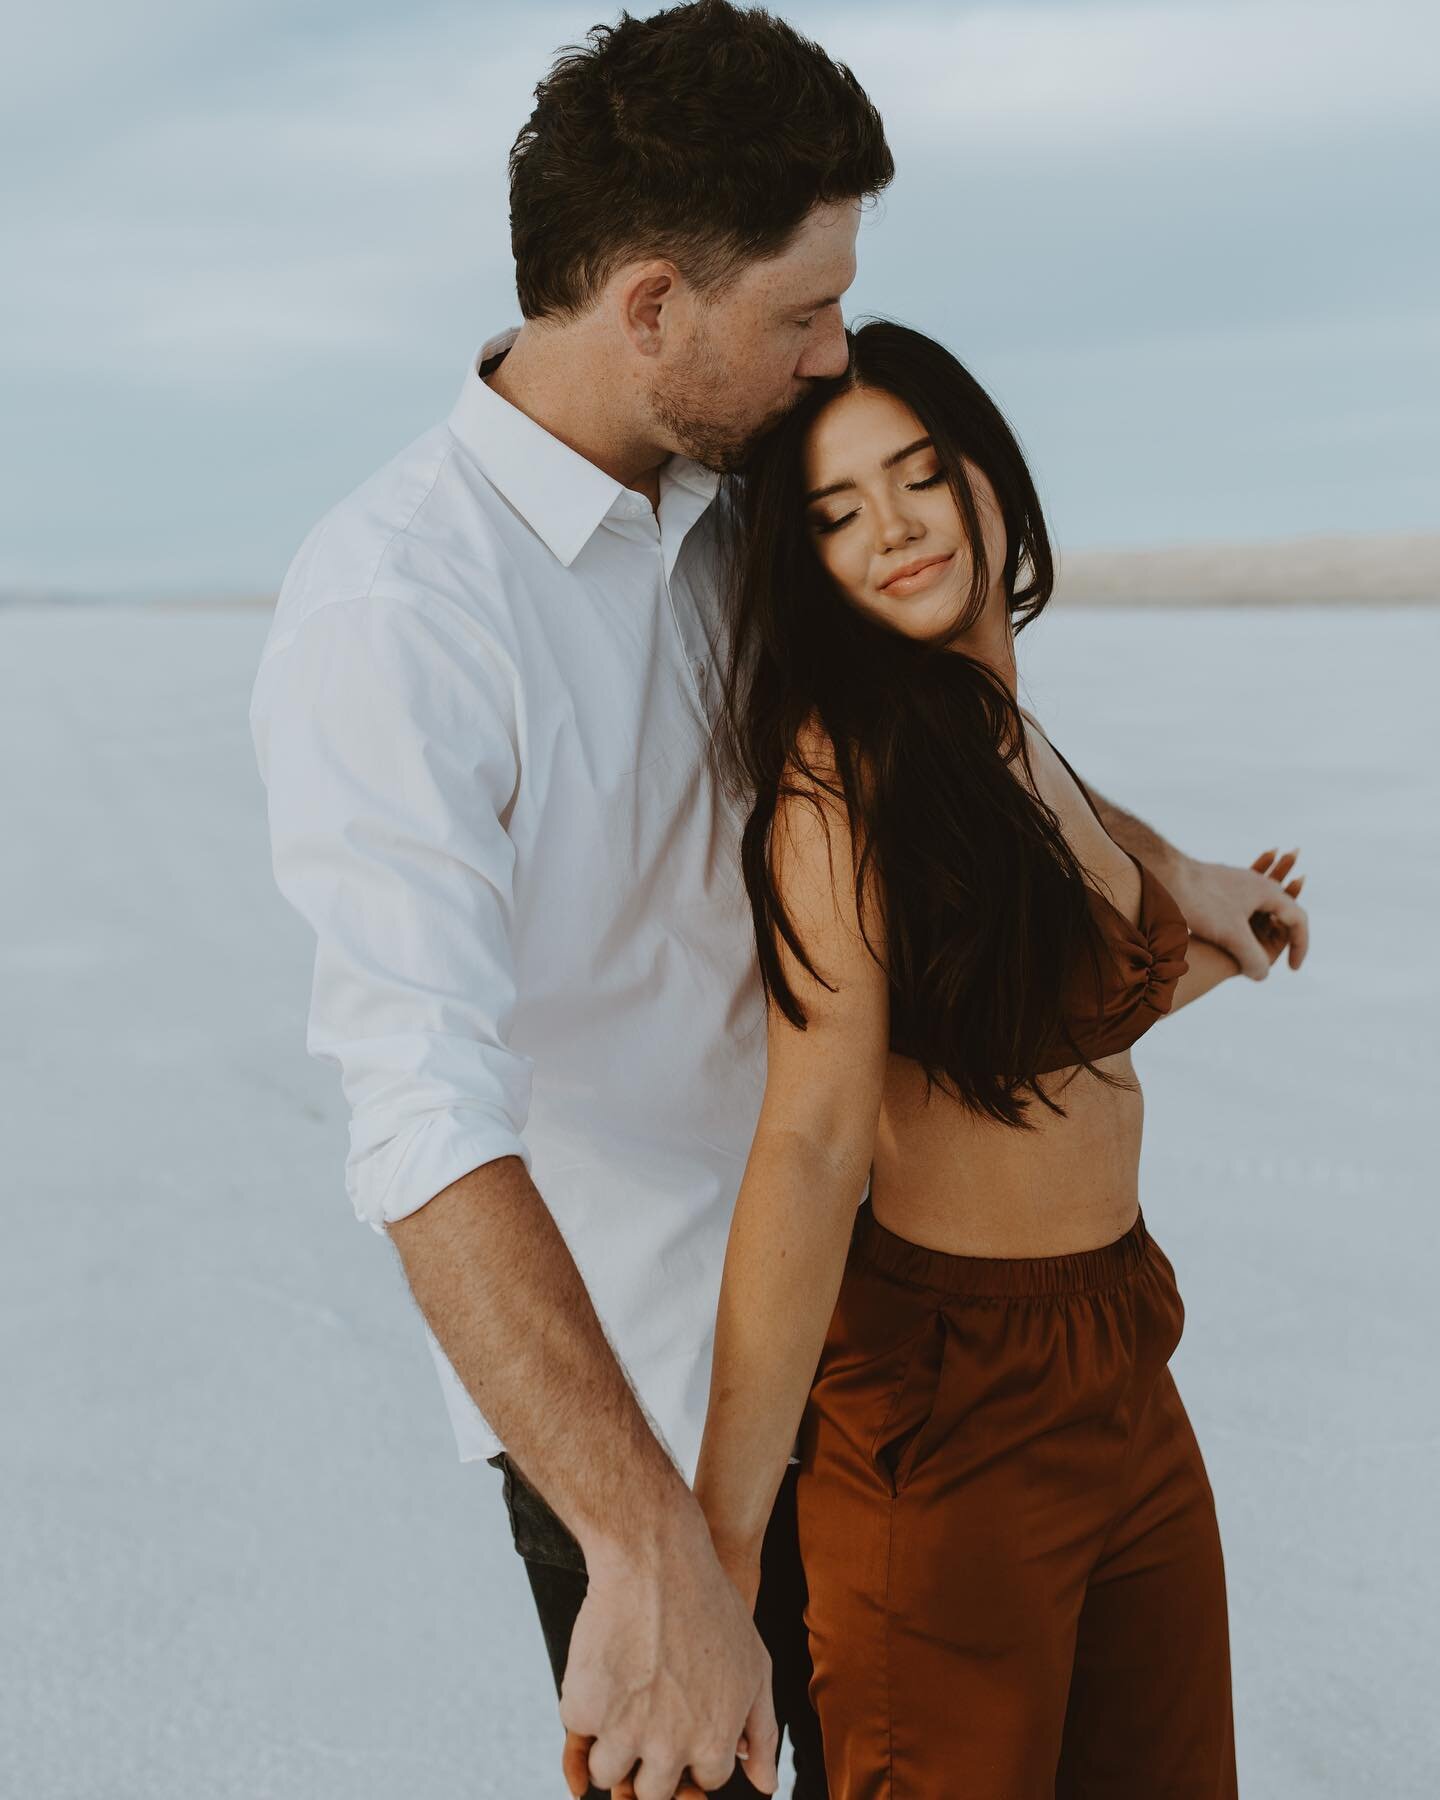 -
The salt flats stretch out, so vast and so wide,
A landscape so stunning, it's hard to decide,
Where to snap photos of this couple in love,
With the sun setting low, and the sky up above.

The white of the salt, so pure and so bright,
Reflects the 